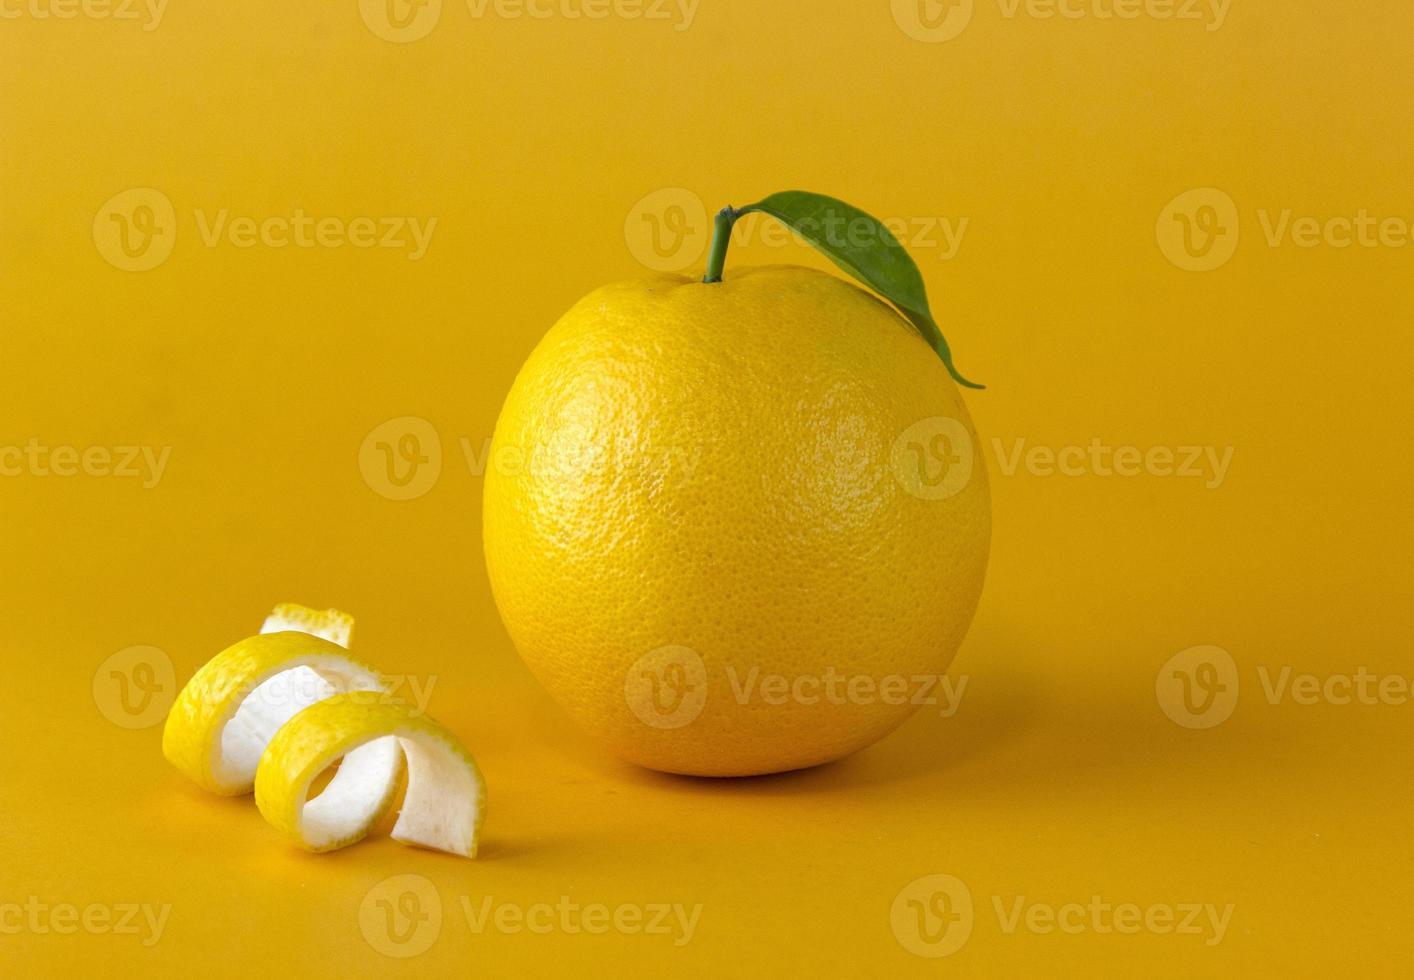 A yellow lemon fruit with leaf and peel slice isolated on yellow background photo